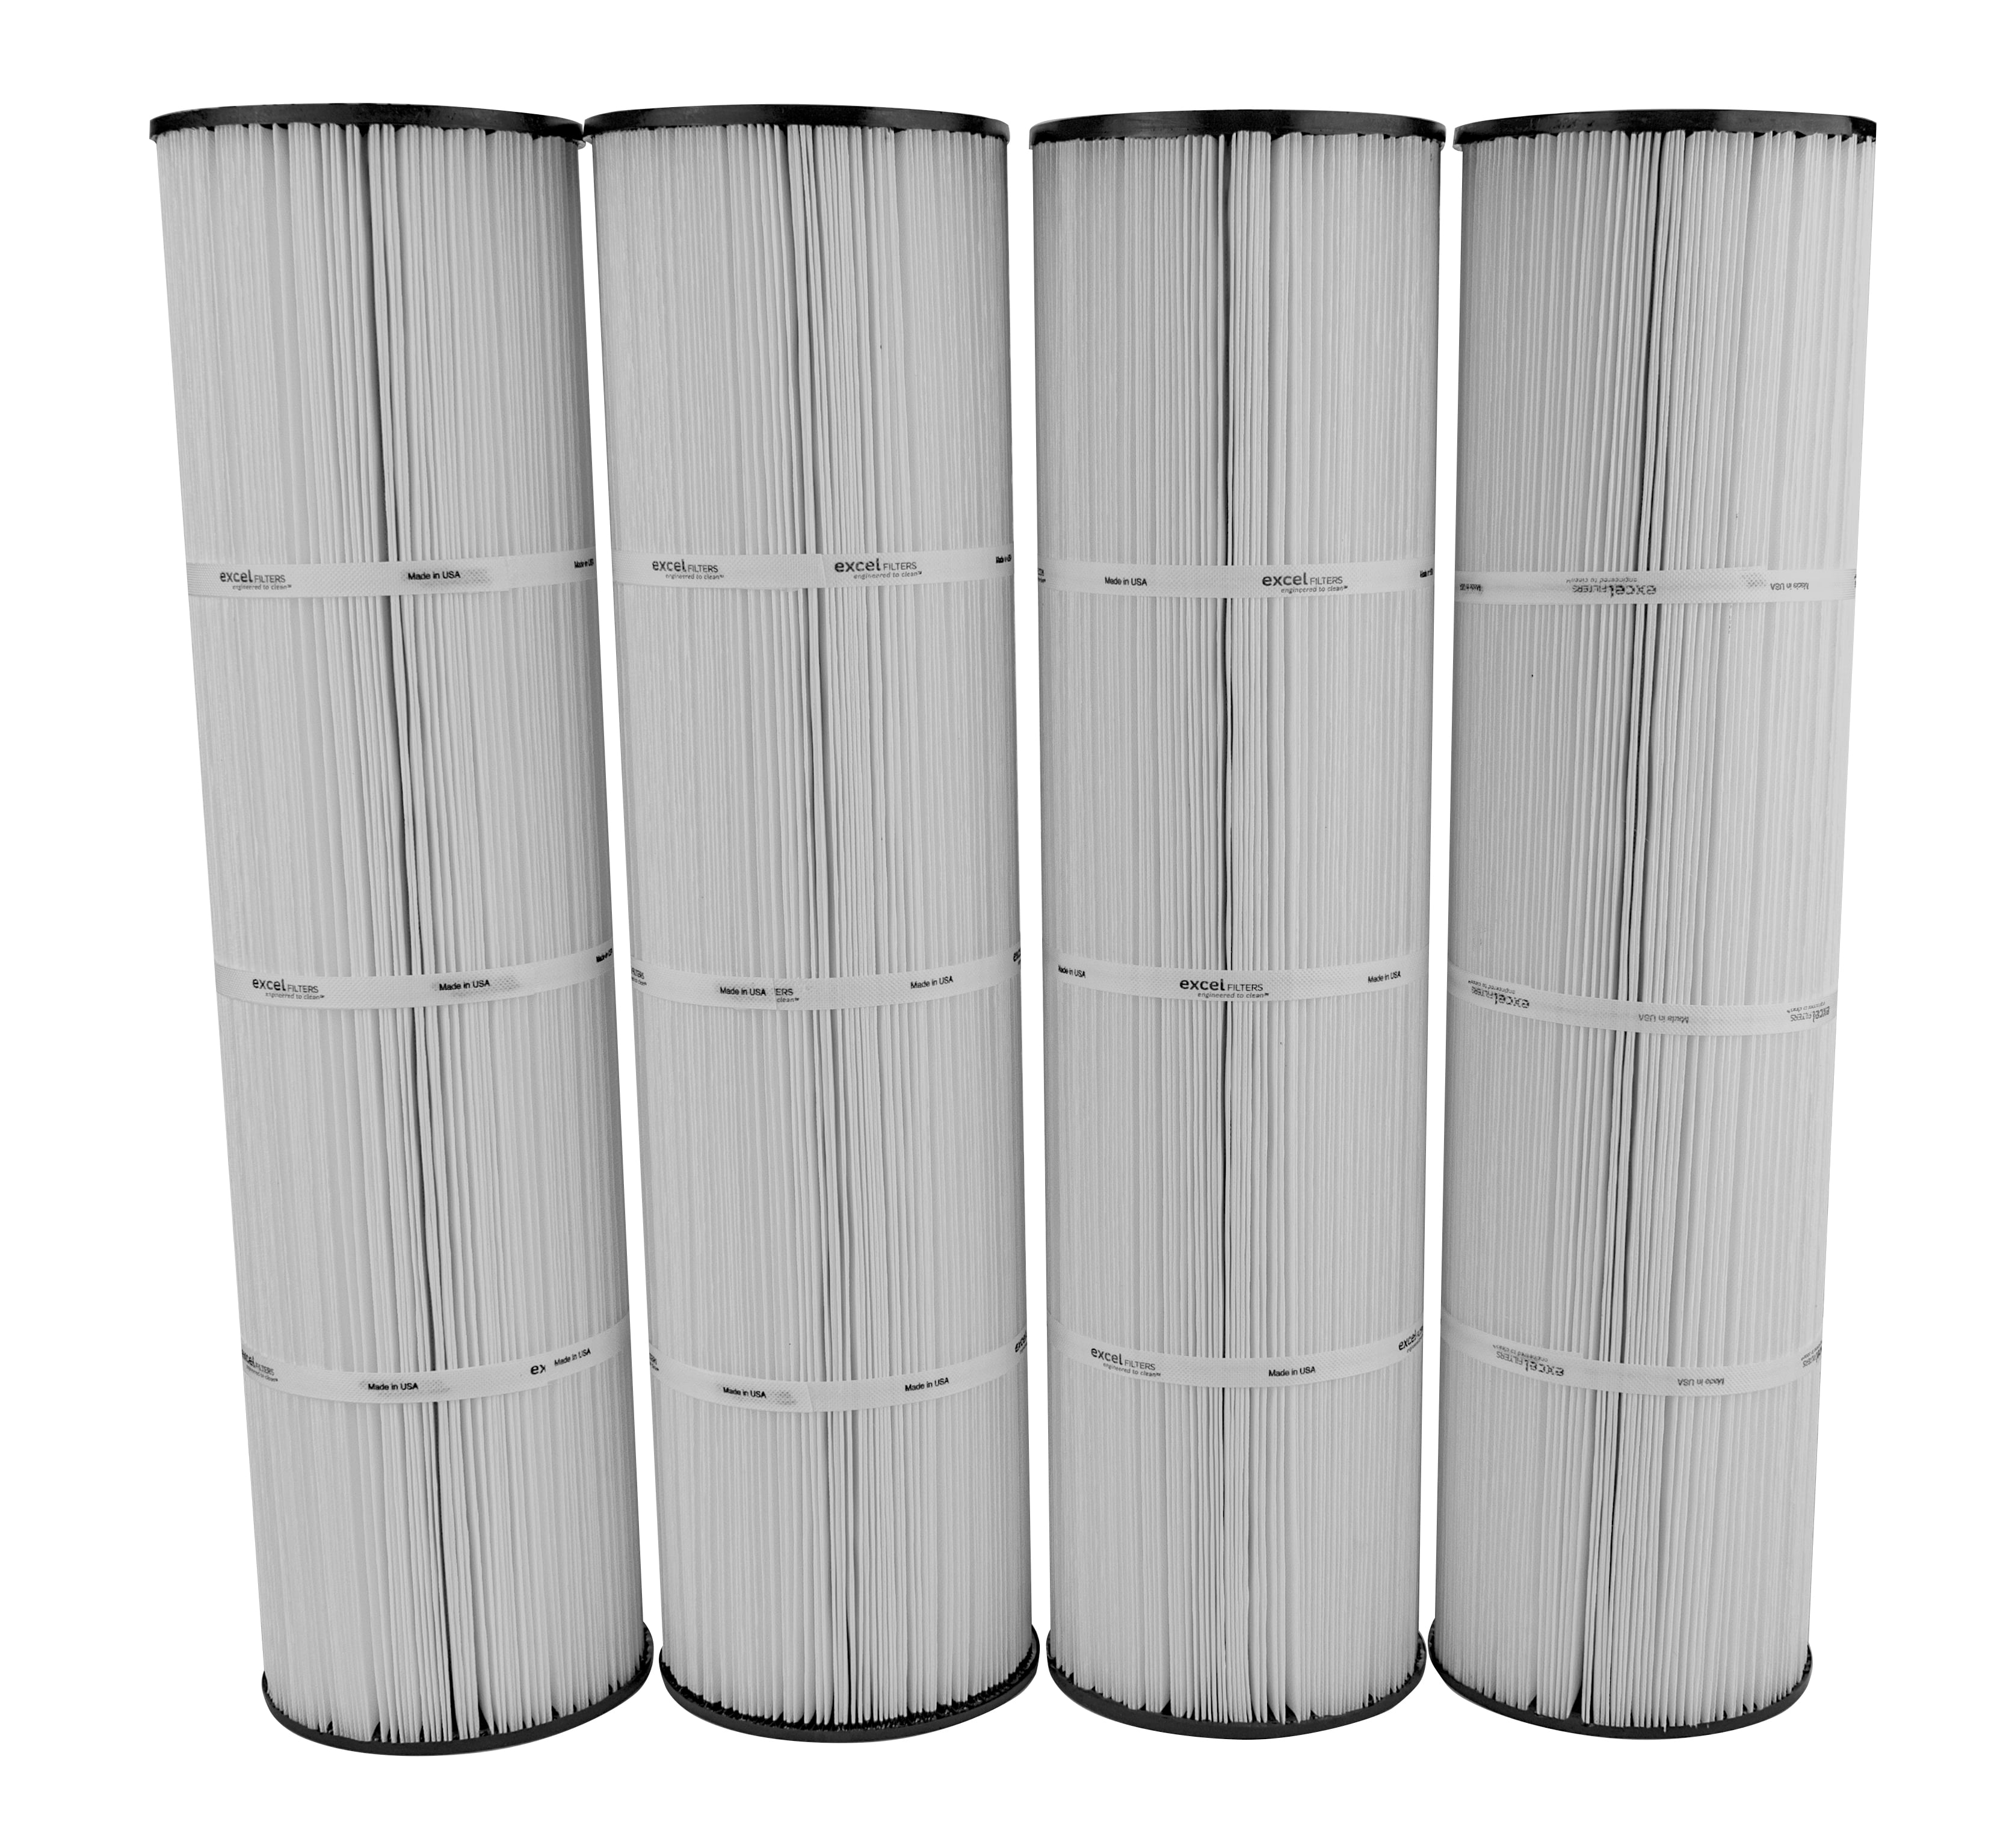 4 Pack Pleatco PJAN115 Filter Cartridge Jandy CL460 A0558000 w/ 6x Filter Washes